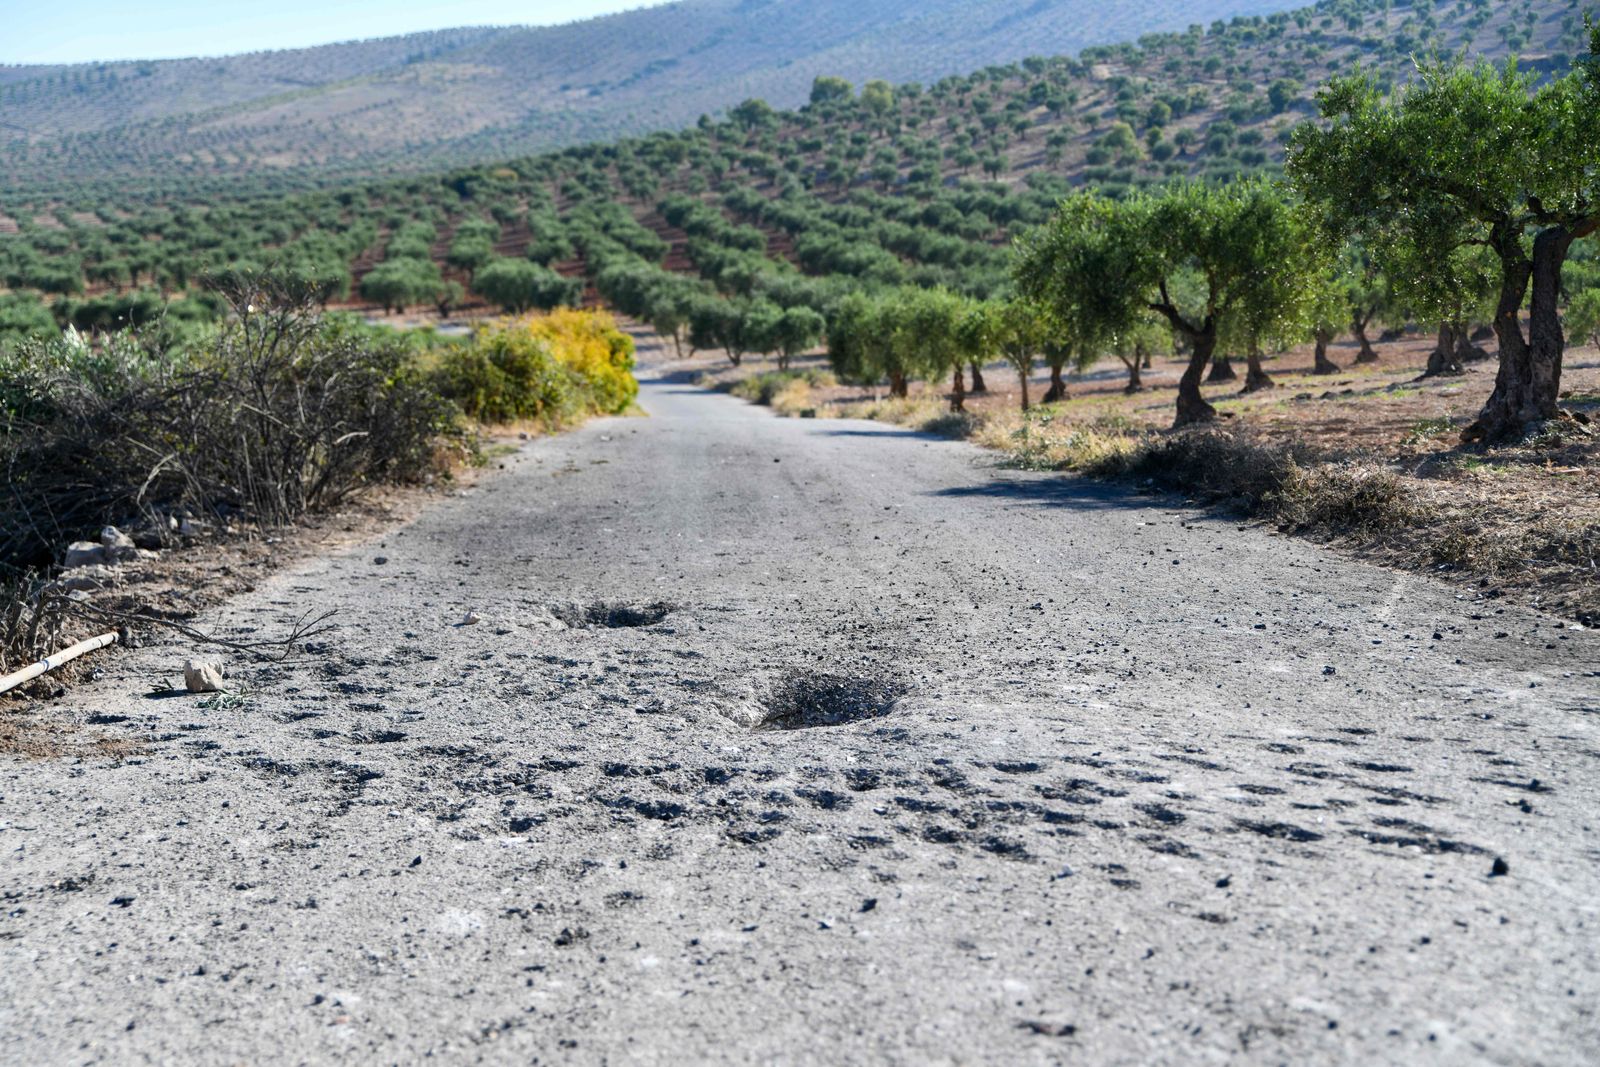 A picture shows site where a US drone targeted Maher al-Agal, a leader in the Islamic State militant group, near the village of Khaltan, near Jindires in northern Syria, on July 12, 2022. - A man US officials called the leader of the Islamic State militant group in Syria was killed Tuesday in a drone strike, the Pentagon said. Maher al-Agal was killed while riding a motorcycle near Jindires in northern Syria, and one of his top aides was 